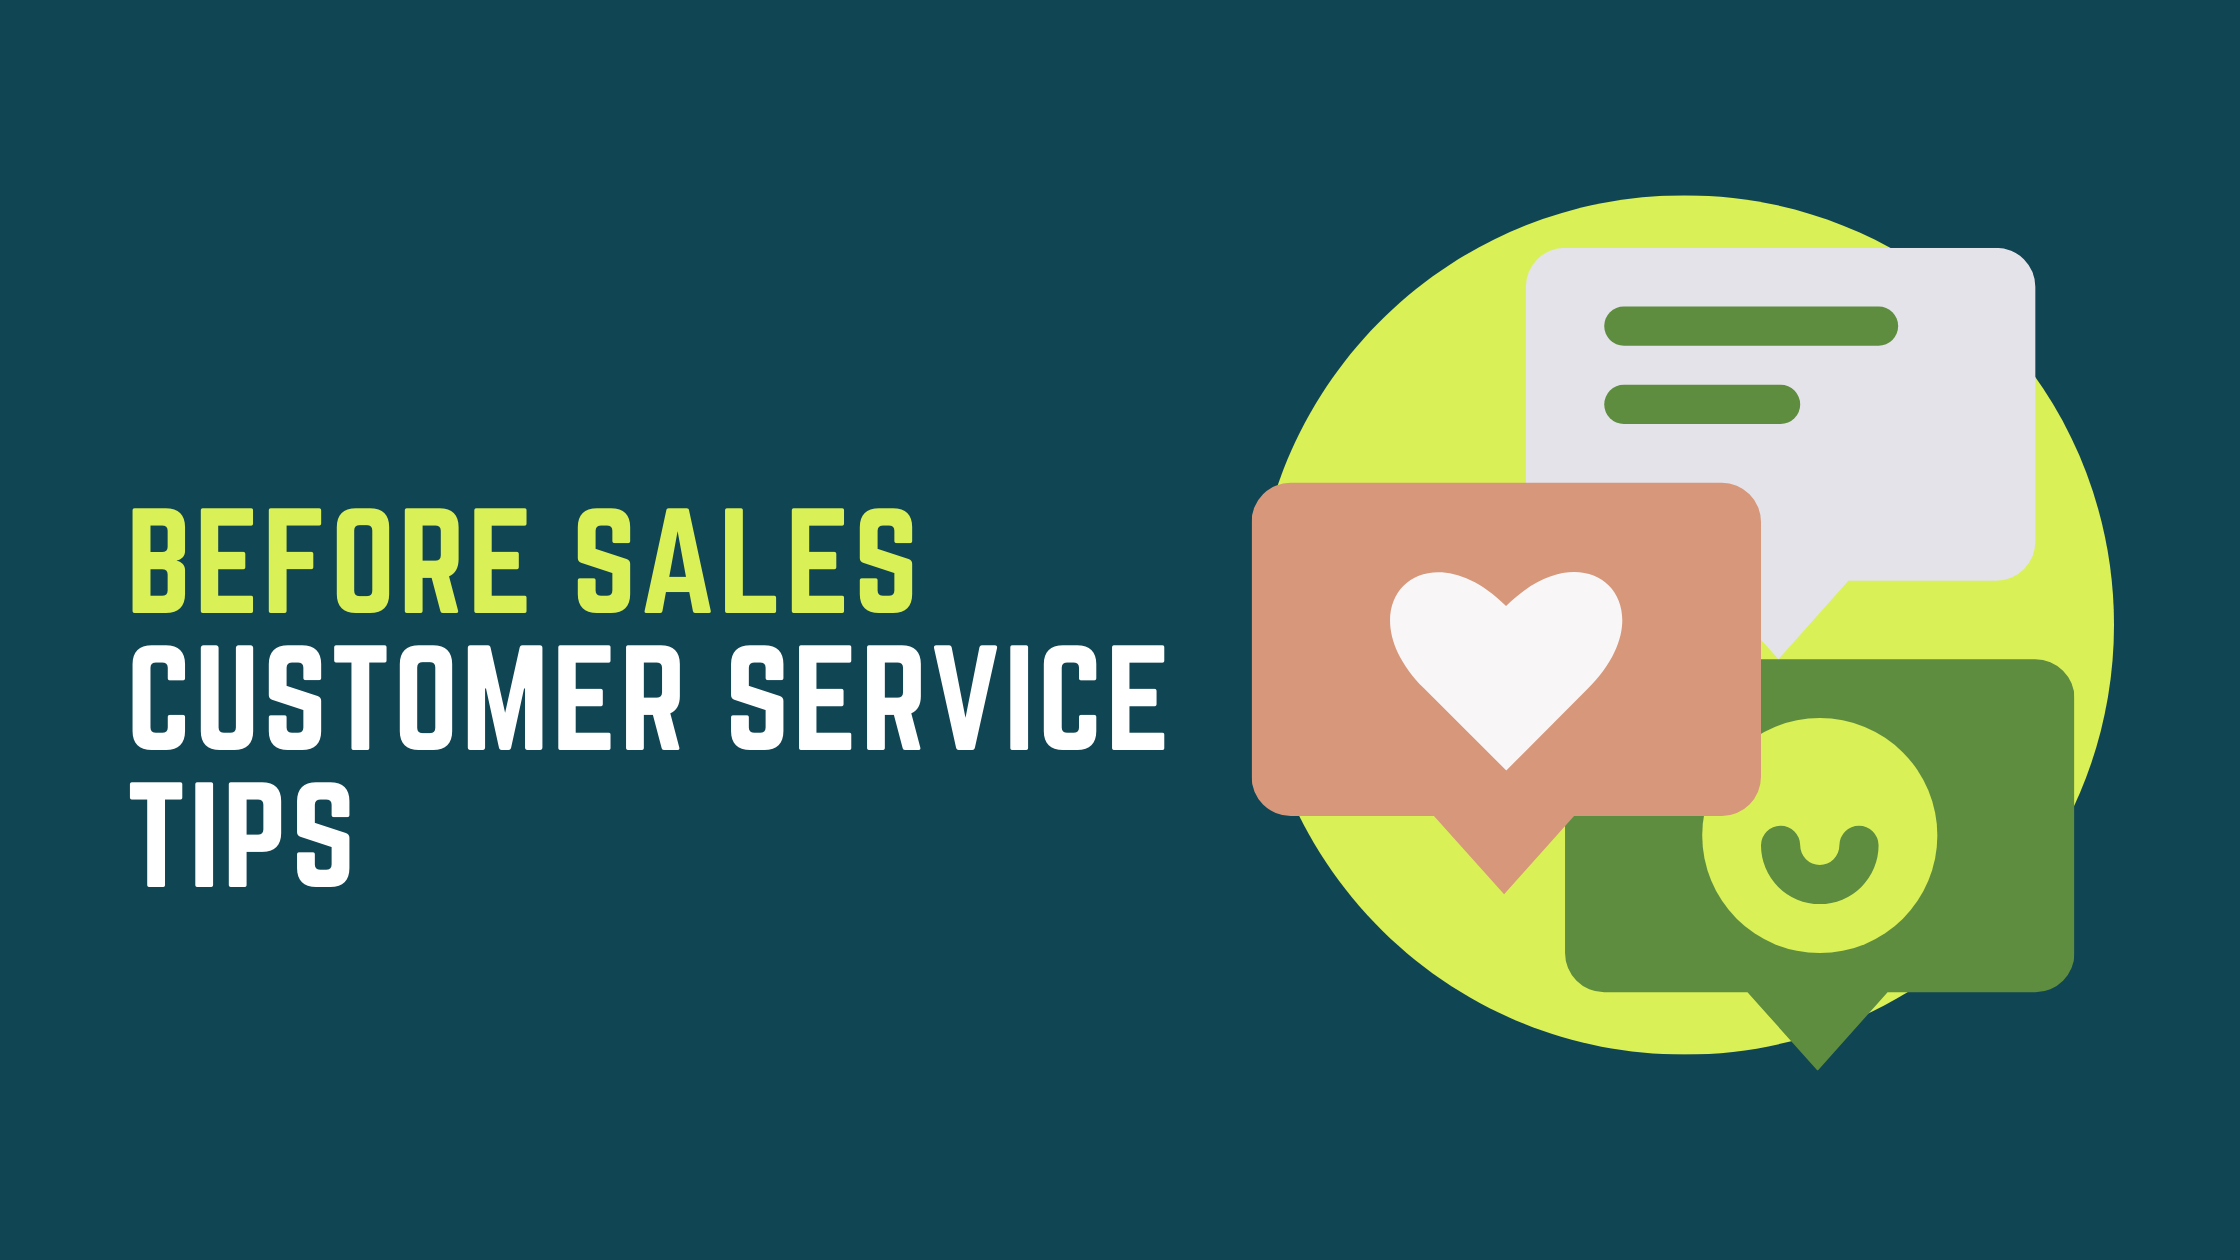 Tips for better customer service on your Shopify store before sales